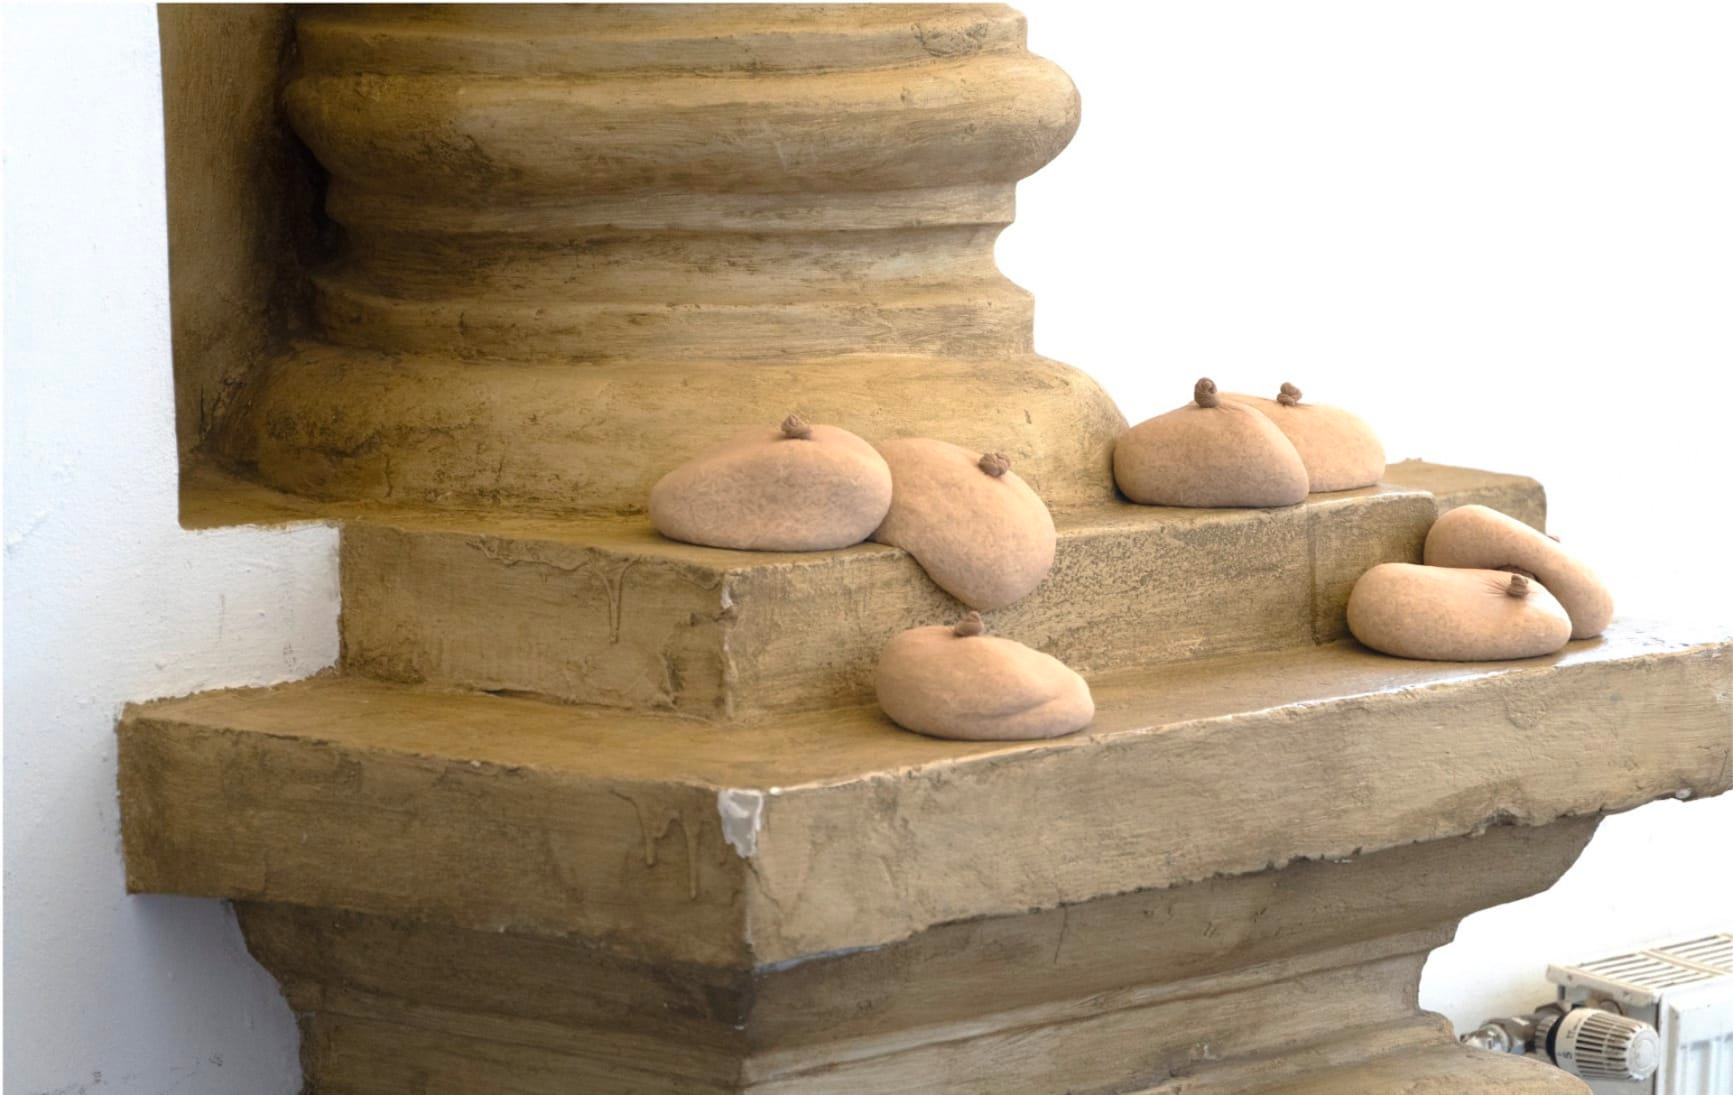 Image of seven rounded slightly floppy-looking beige objects, each with what looks like a little brown teat, placed or draped on a ledge of an architectural feature.